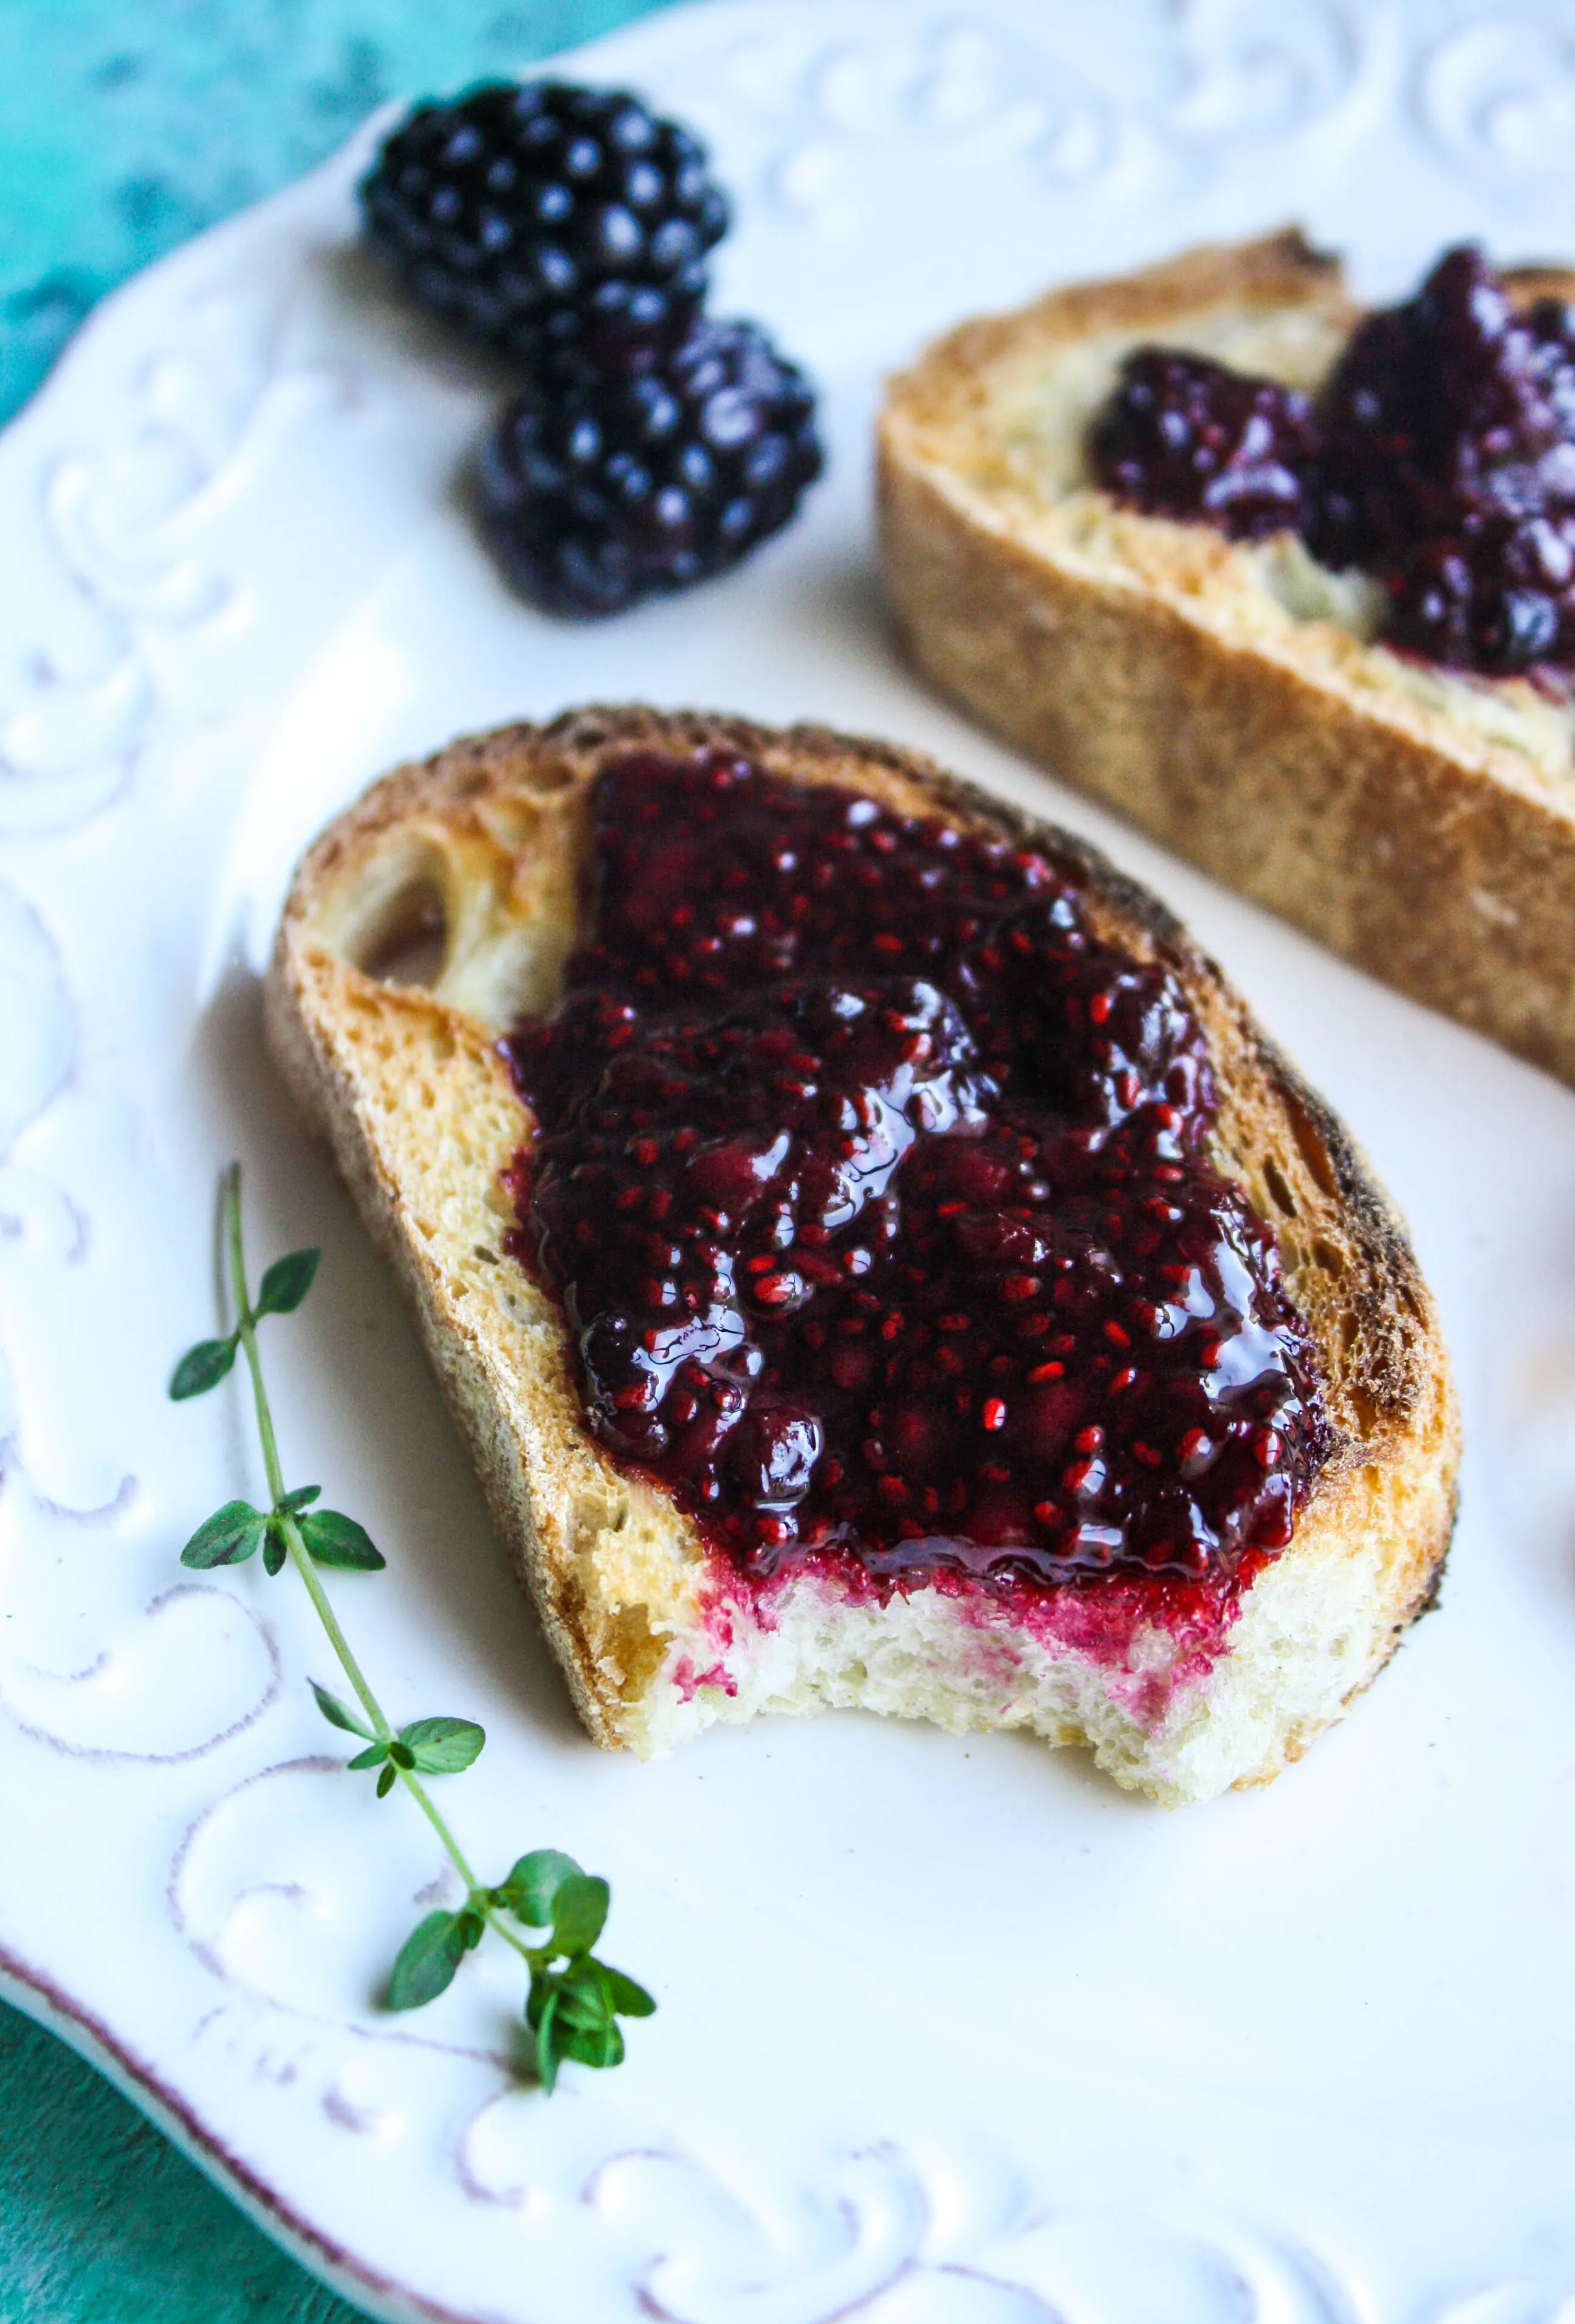 Blackberry-thyme chia seed jam is simple to make and it makes mornings better! Blackberry-thyme chia seed jam is a treat for breakfast, or with peanut butter for a sandwich.